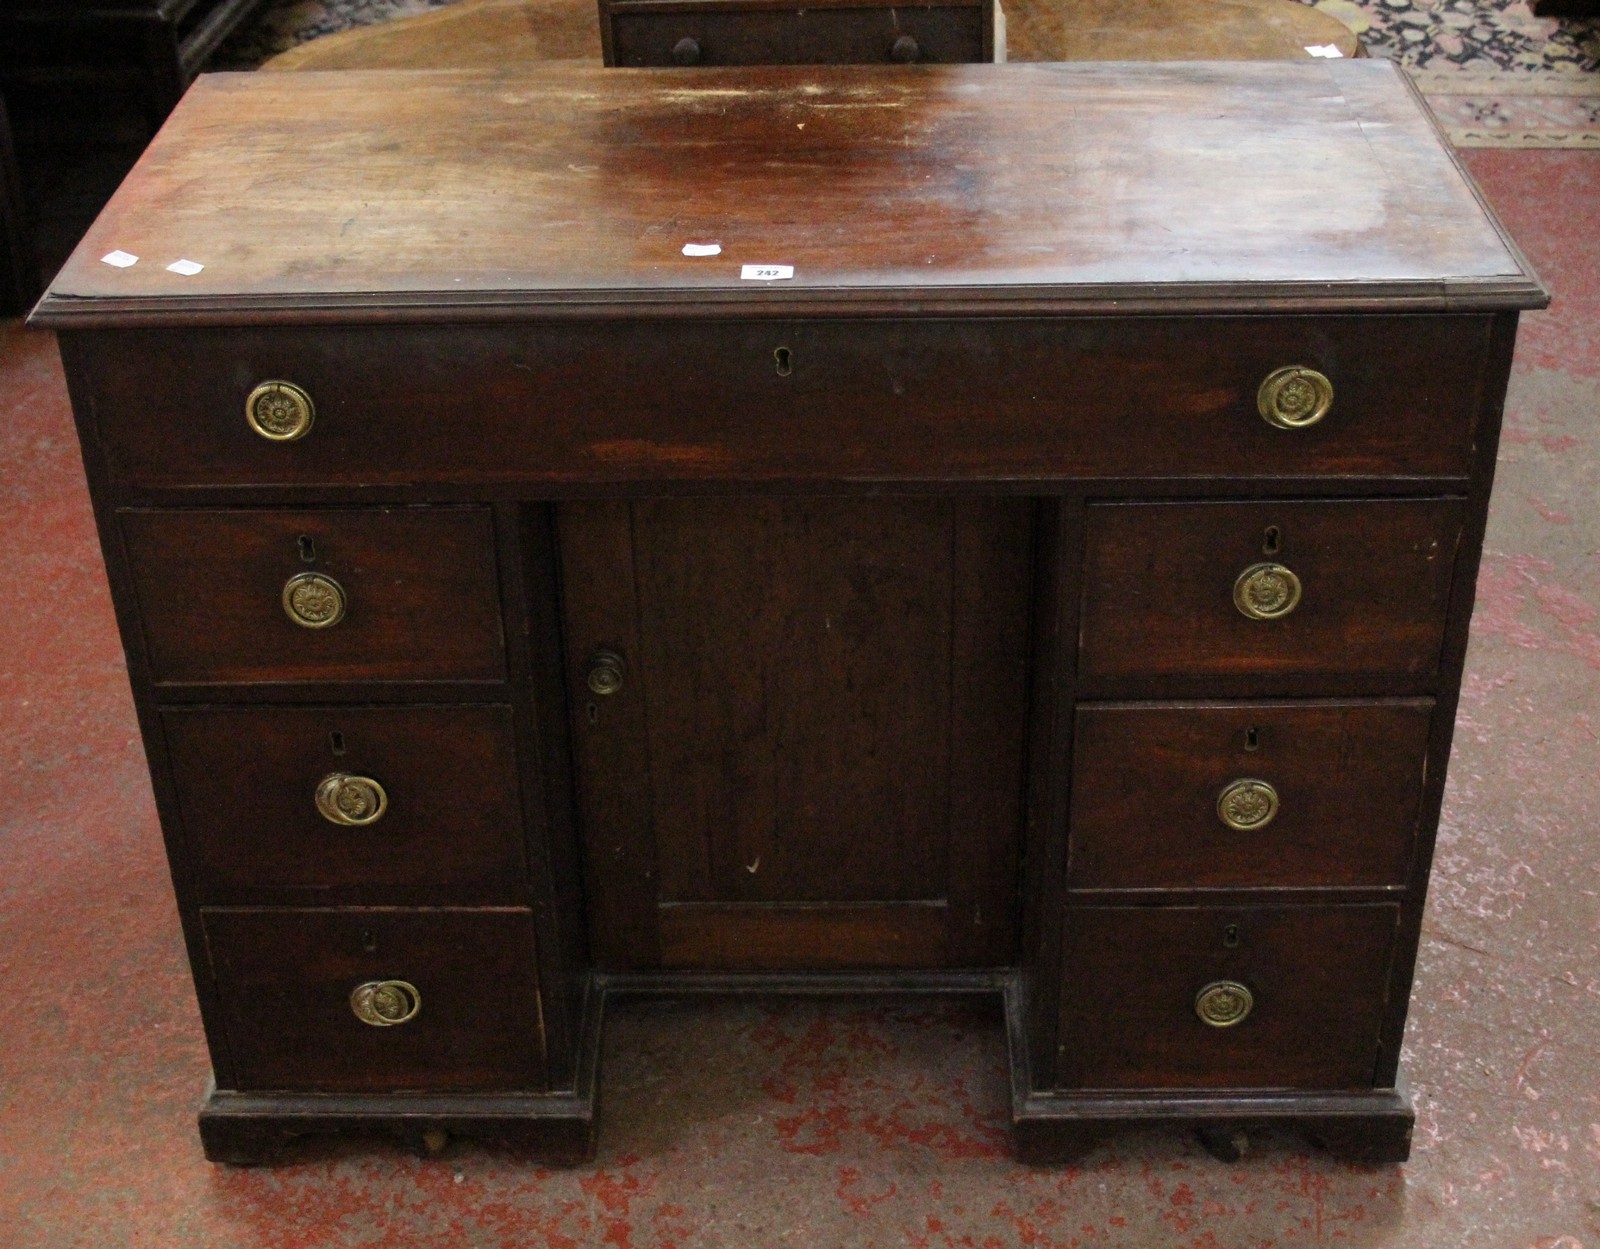 A 19th Century mahogany kneehole desk with one long drawer and six short drawers flanking central